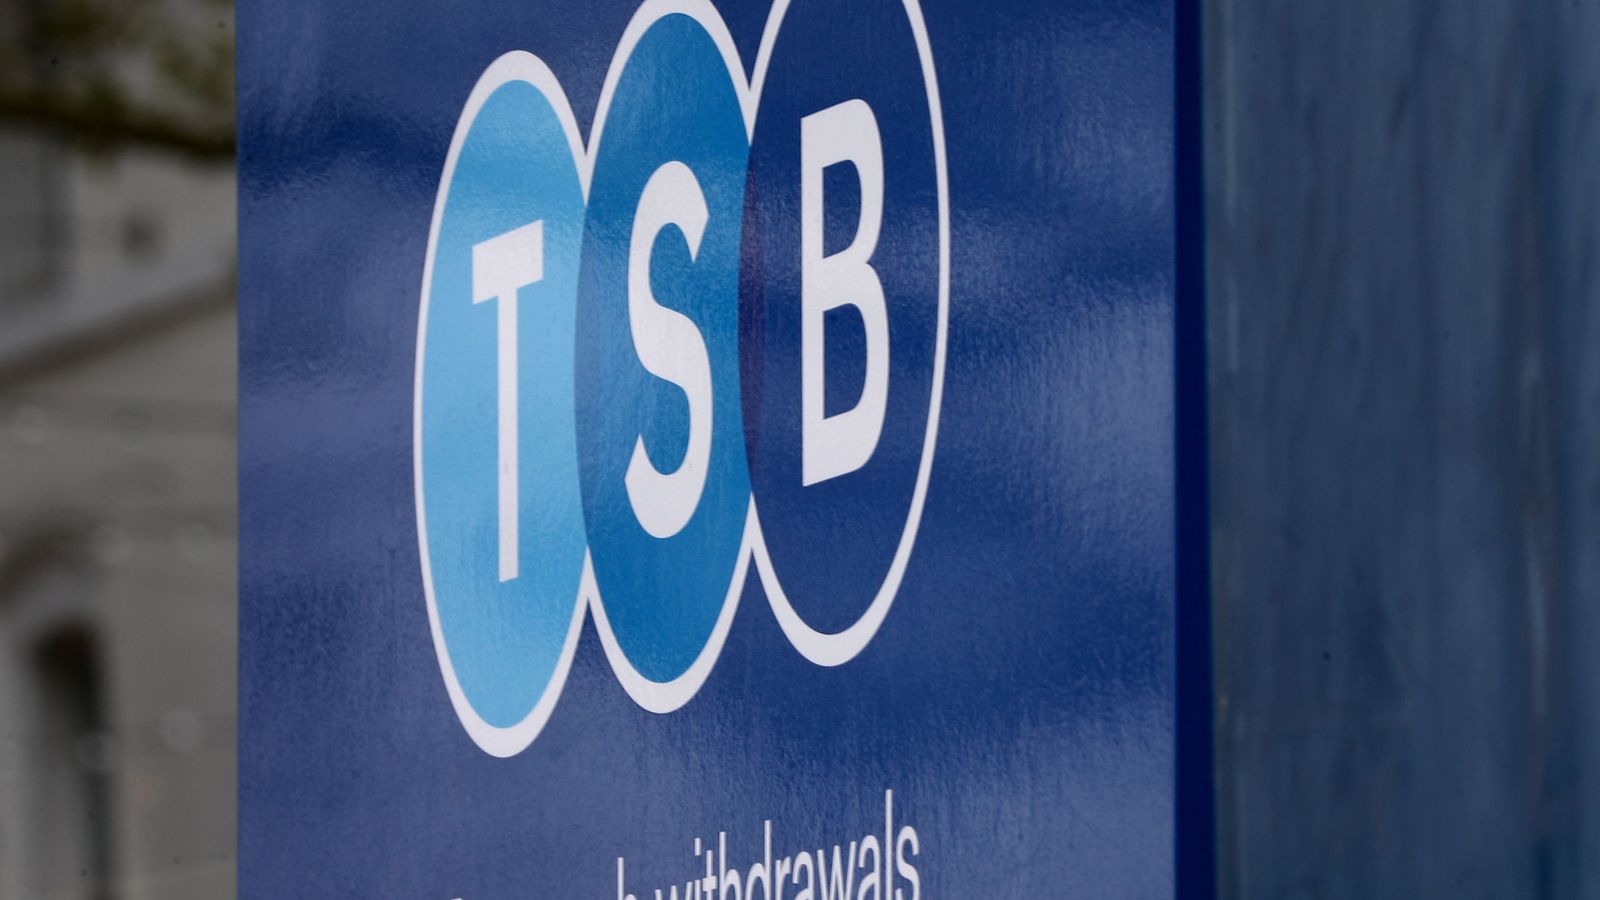 TSB to cut jobs and branches this year, parent firm reveals